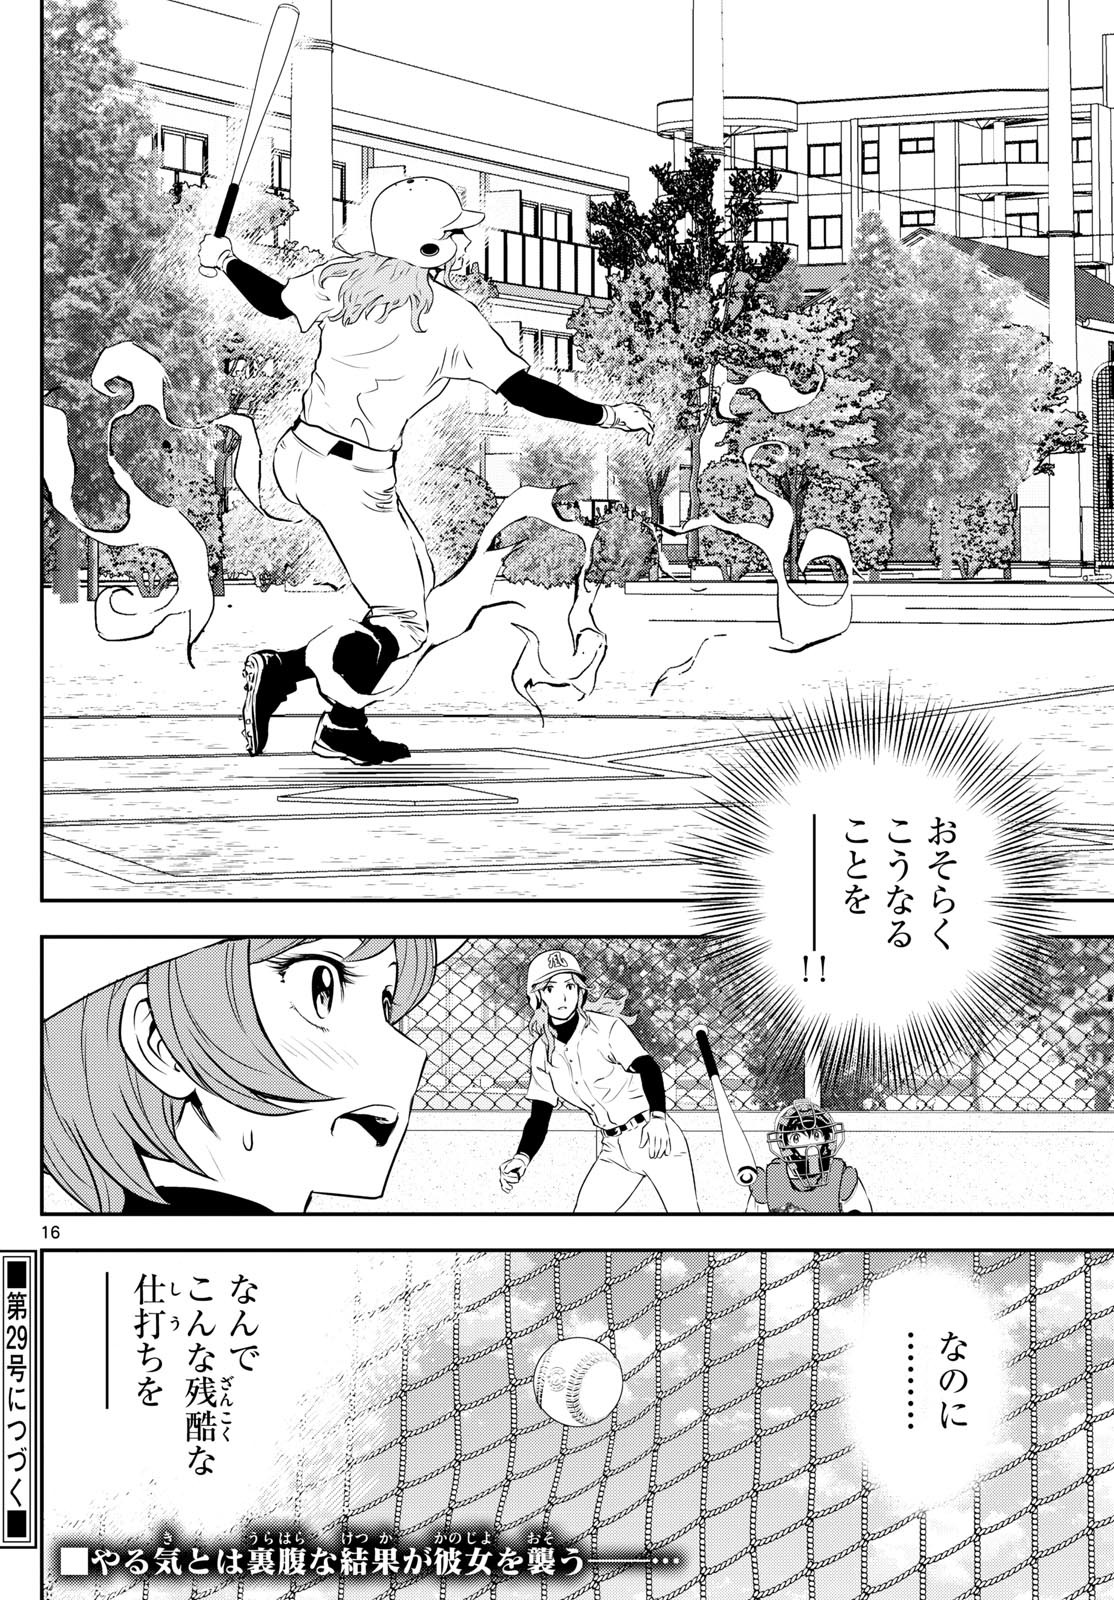 Major 2nd - メジャーセカンド - Chapter 280 - Page 16